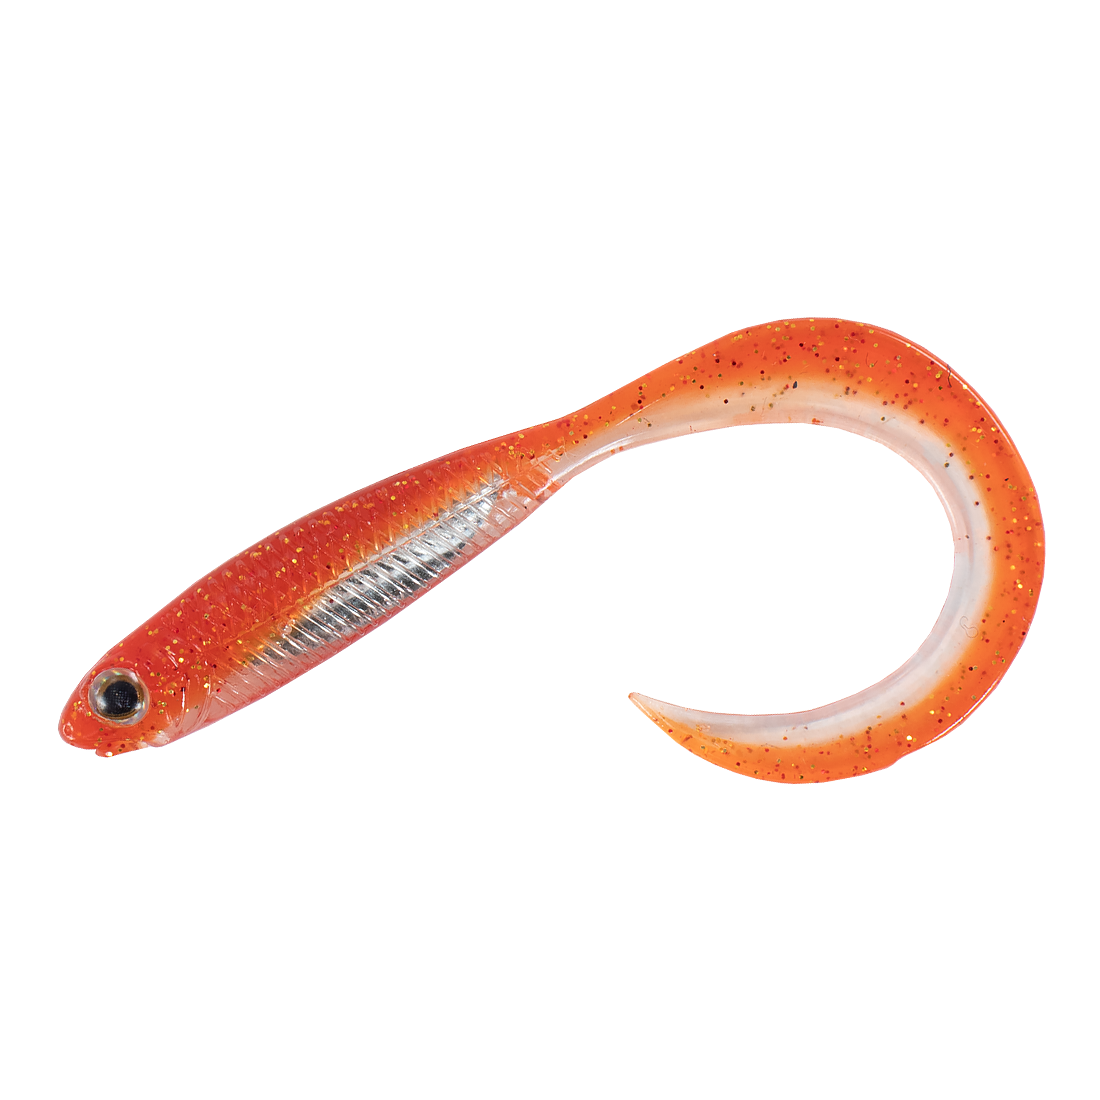 Fish Arrow Flash J Curly Tail SW Lure